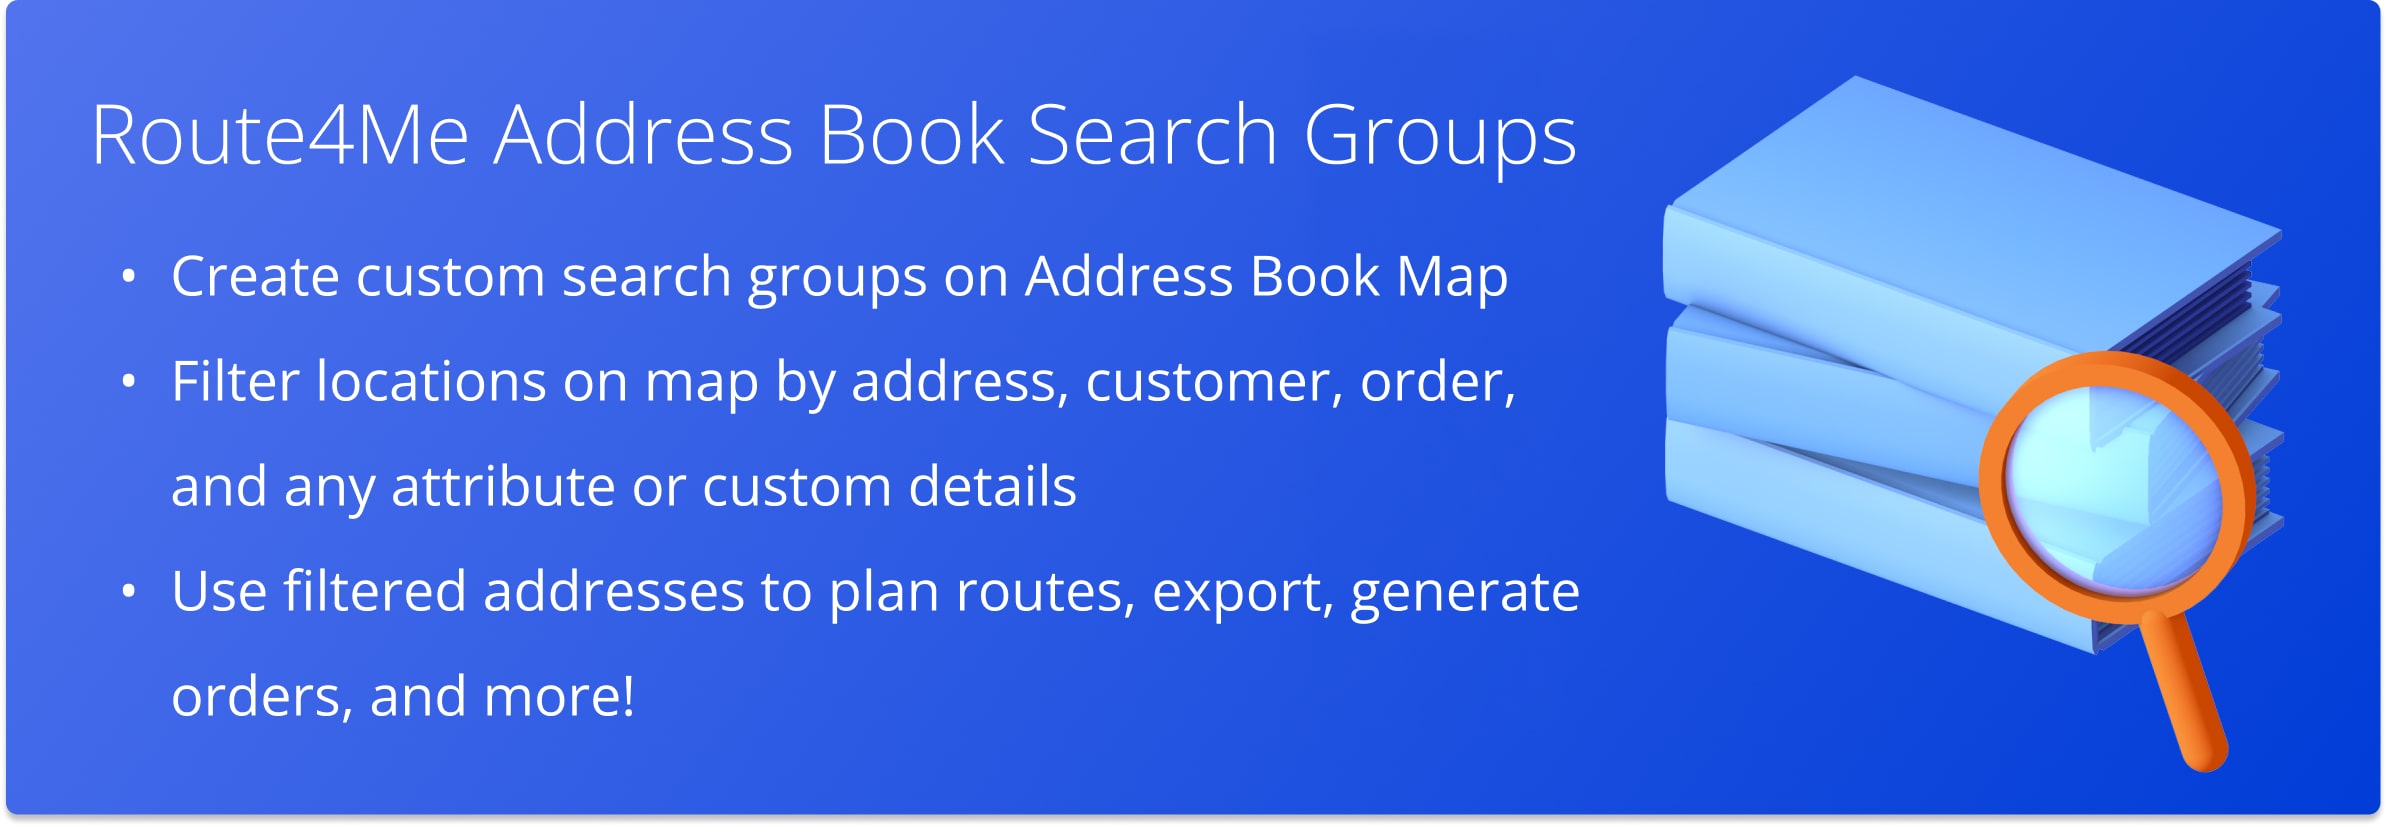 Route4Me Address Book Map Search Groups: Create custom filters, filter locations on map by address, customer, order, and custom detail, plan routes, export, generate orders.